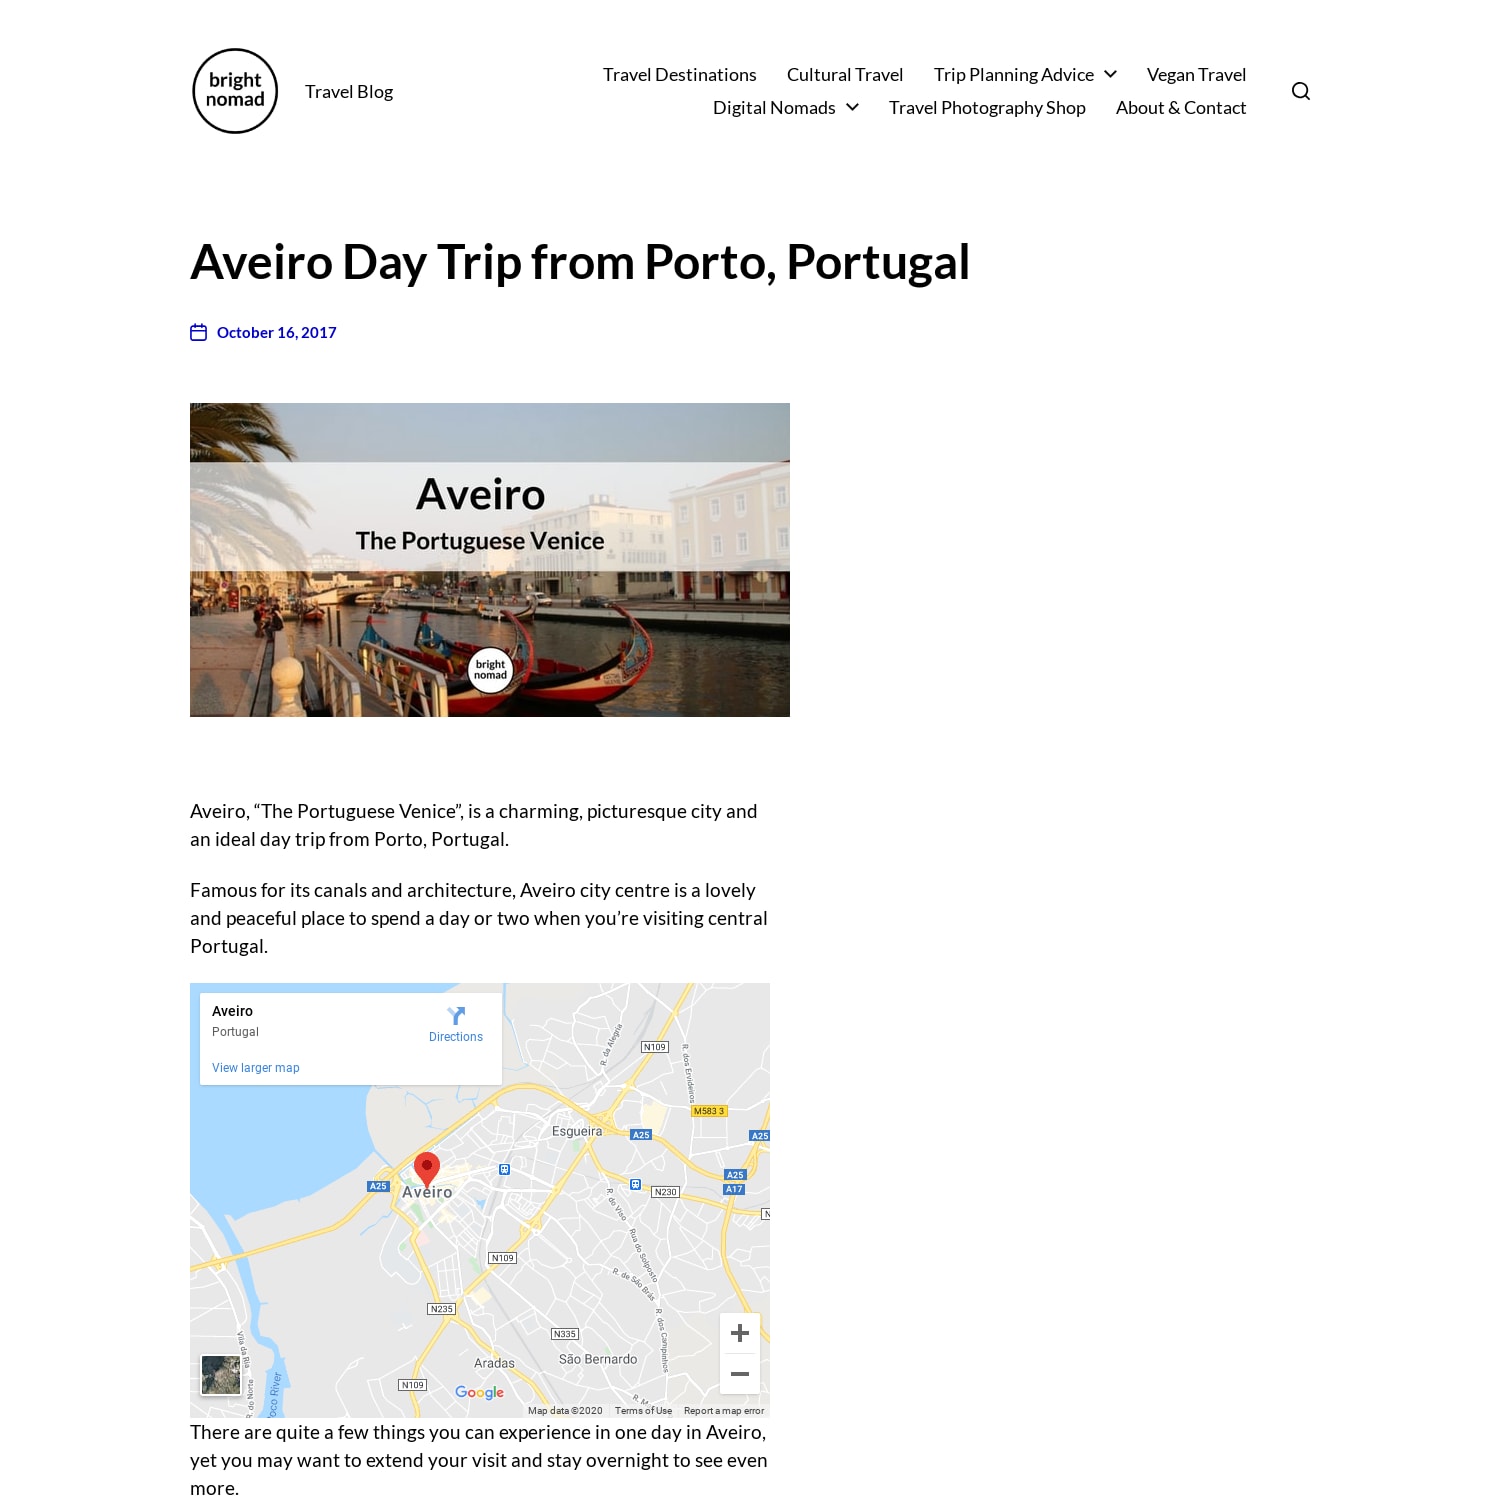 Aveiro Day Trip from Porto, Portugal - A Beautiful City in Portugal